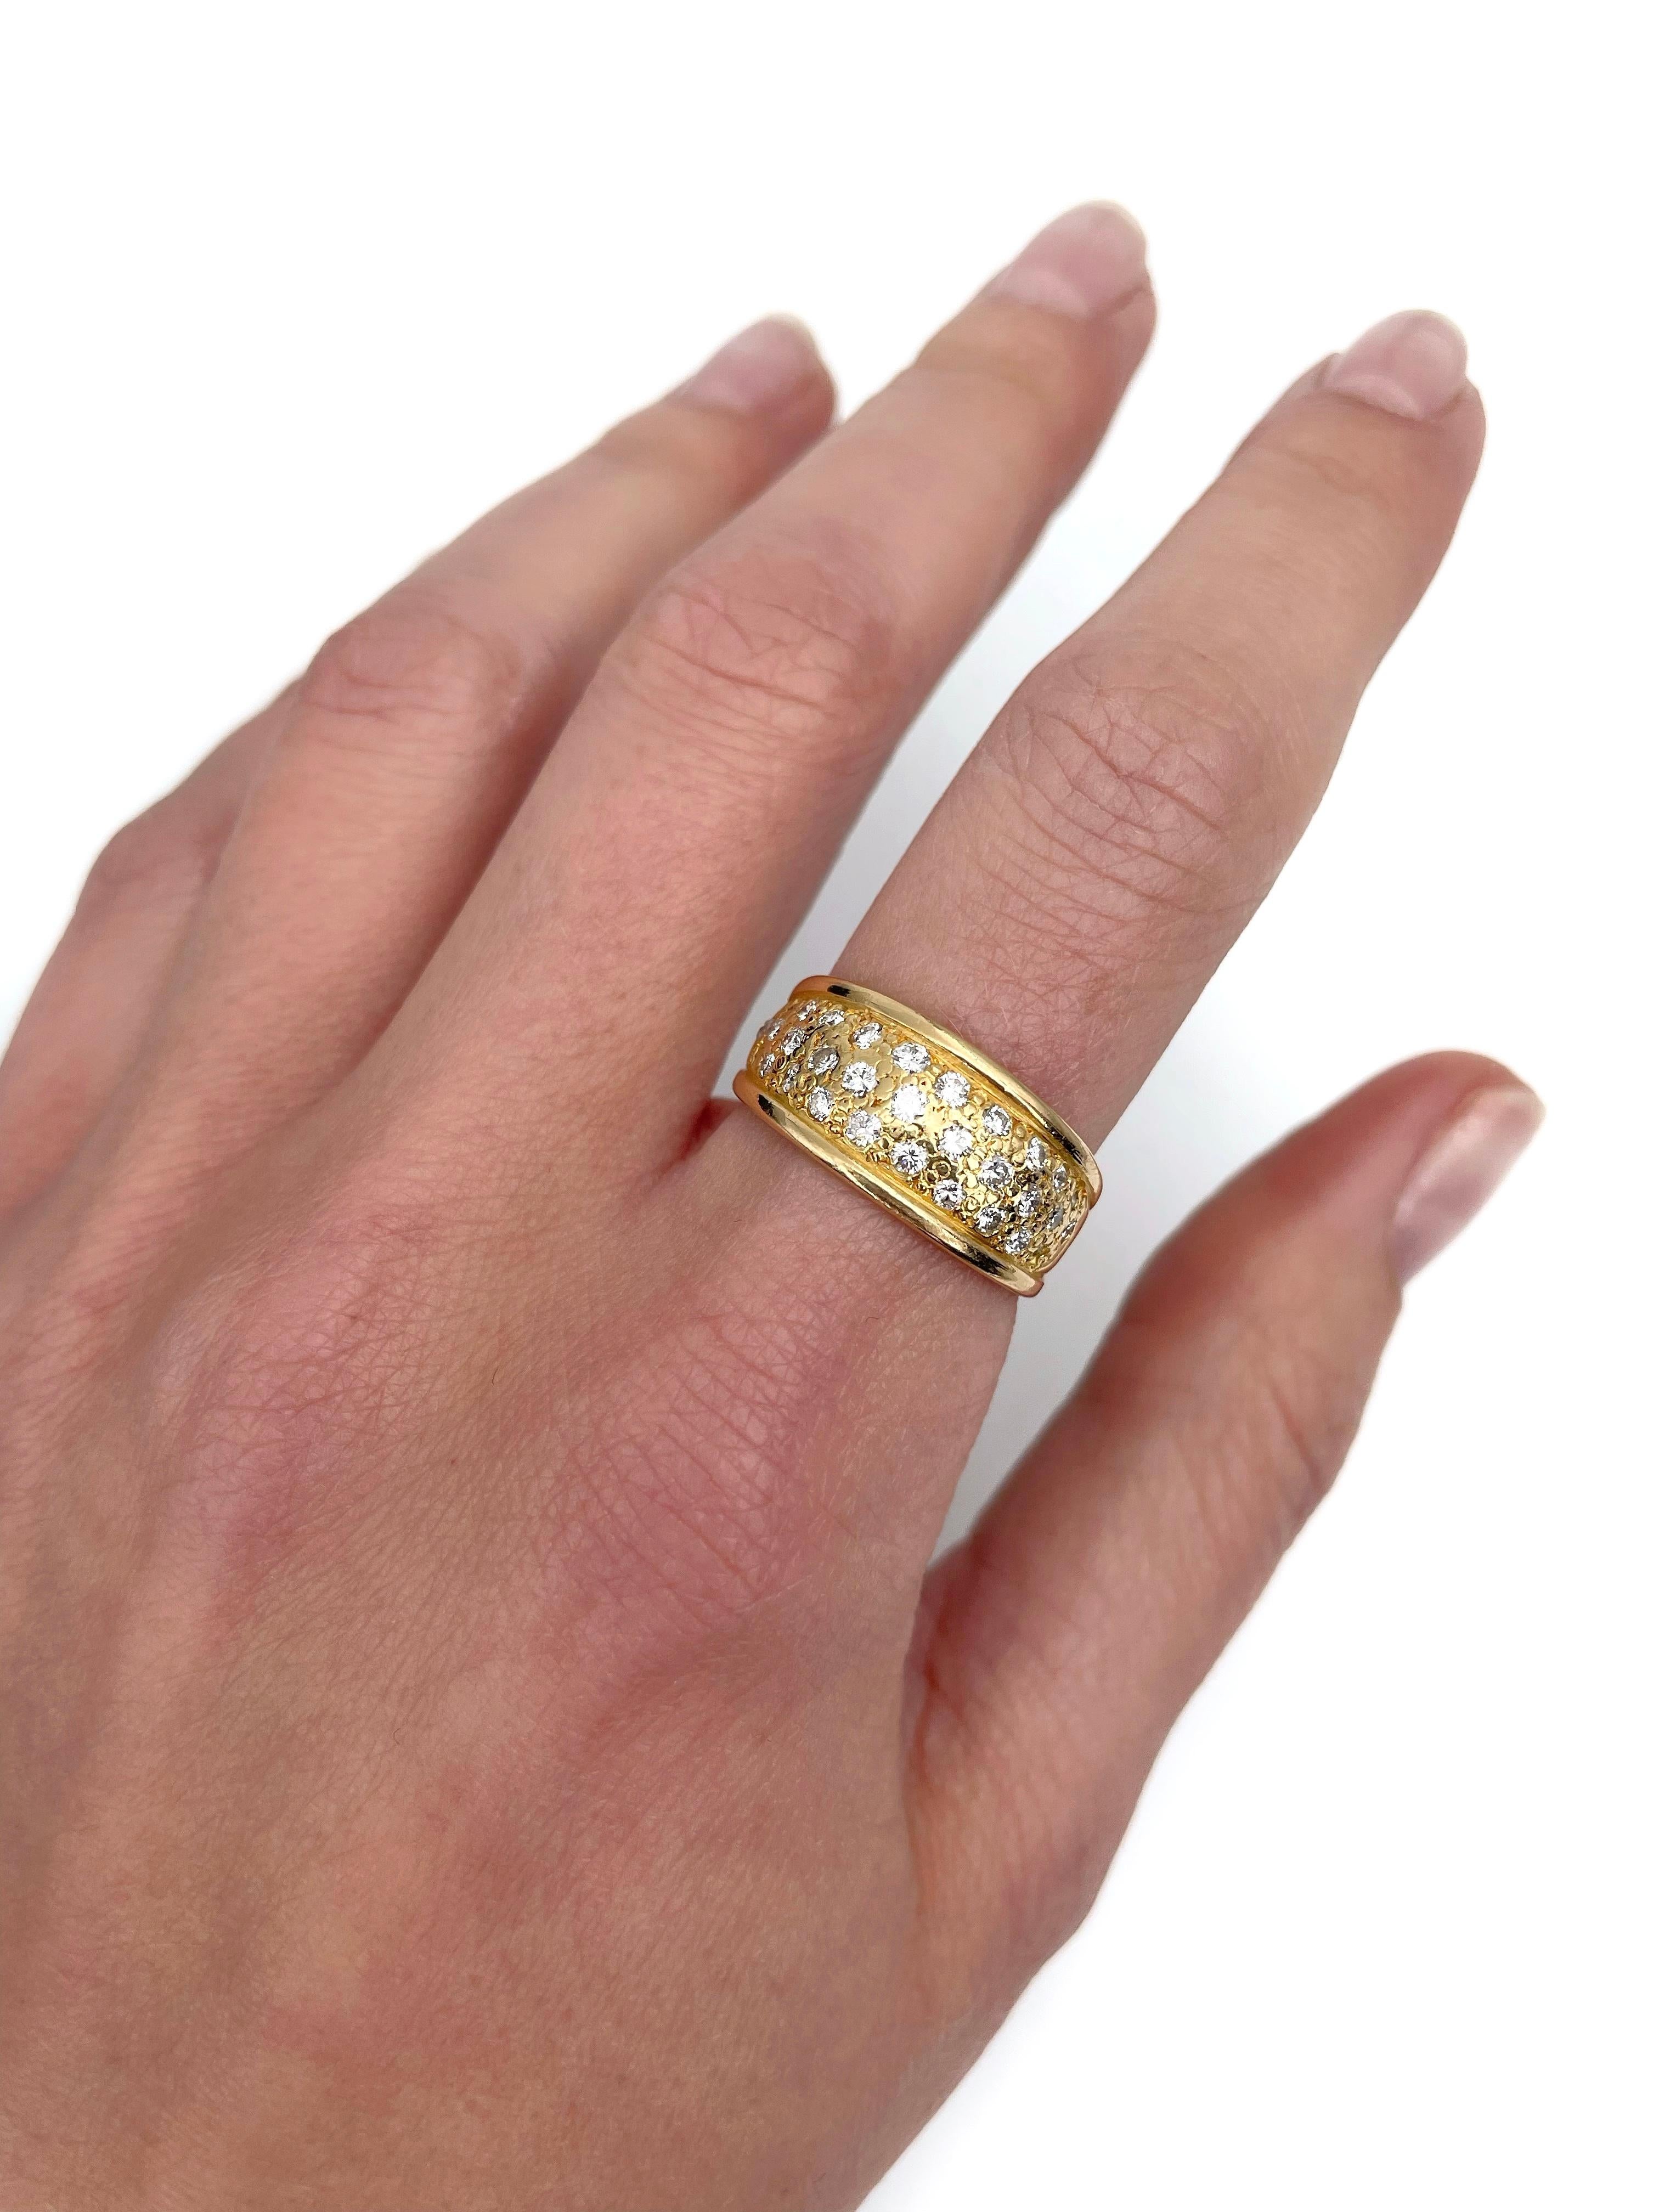 This is a vintage wide band ring crafted in 18K yellow gold. The piece features 31pcs. brilliant cut diamonds: TW 0.77ct, RW+/RW, VS-SI.

Weight: 5.81g 
Size: 17.75 (US 7.5)

———

If you have any questions, please feel free to ask. We describe our